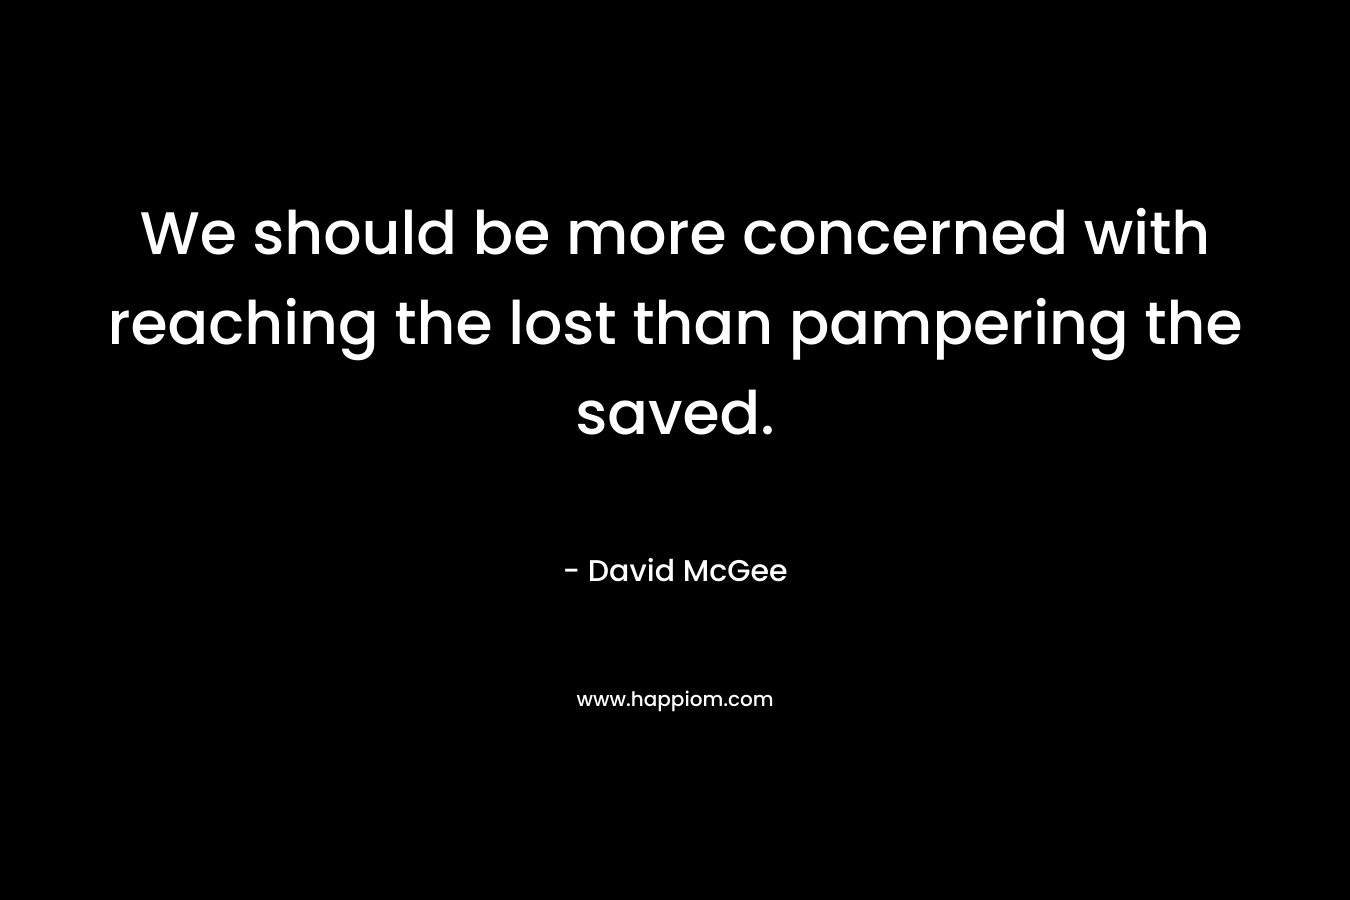 We should be more concerned with reaching the lost than pampering the saved. – David McGee